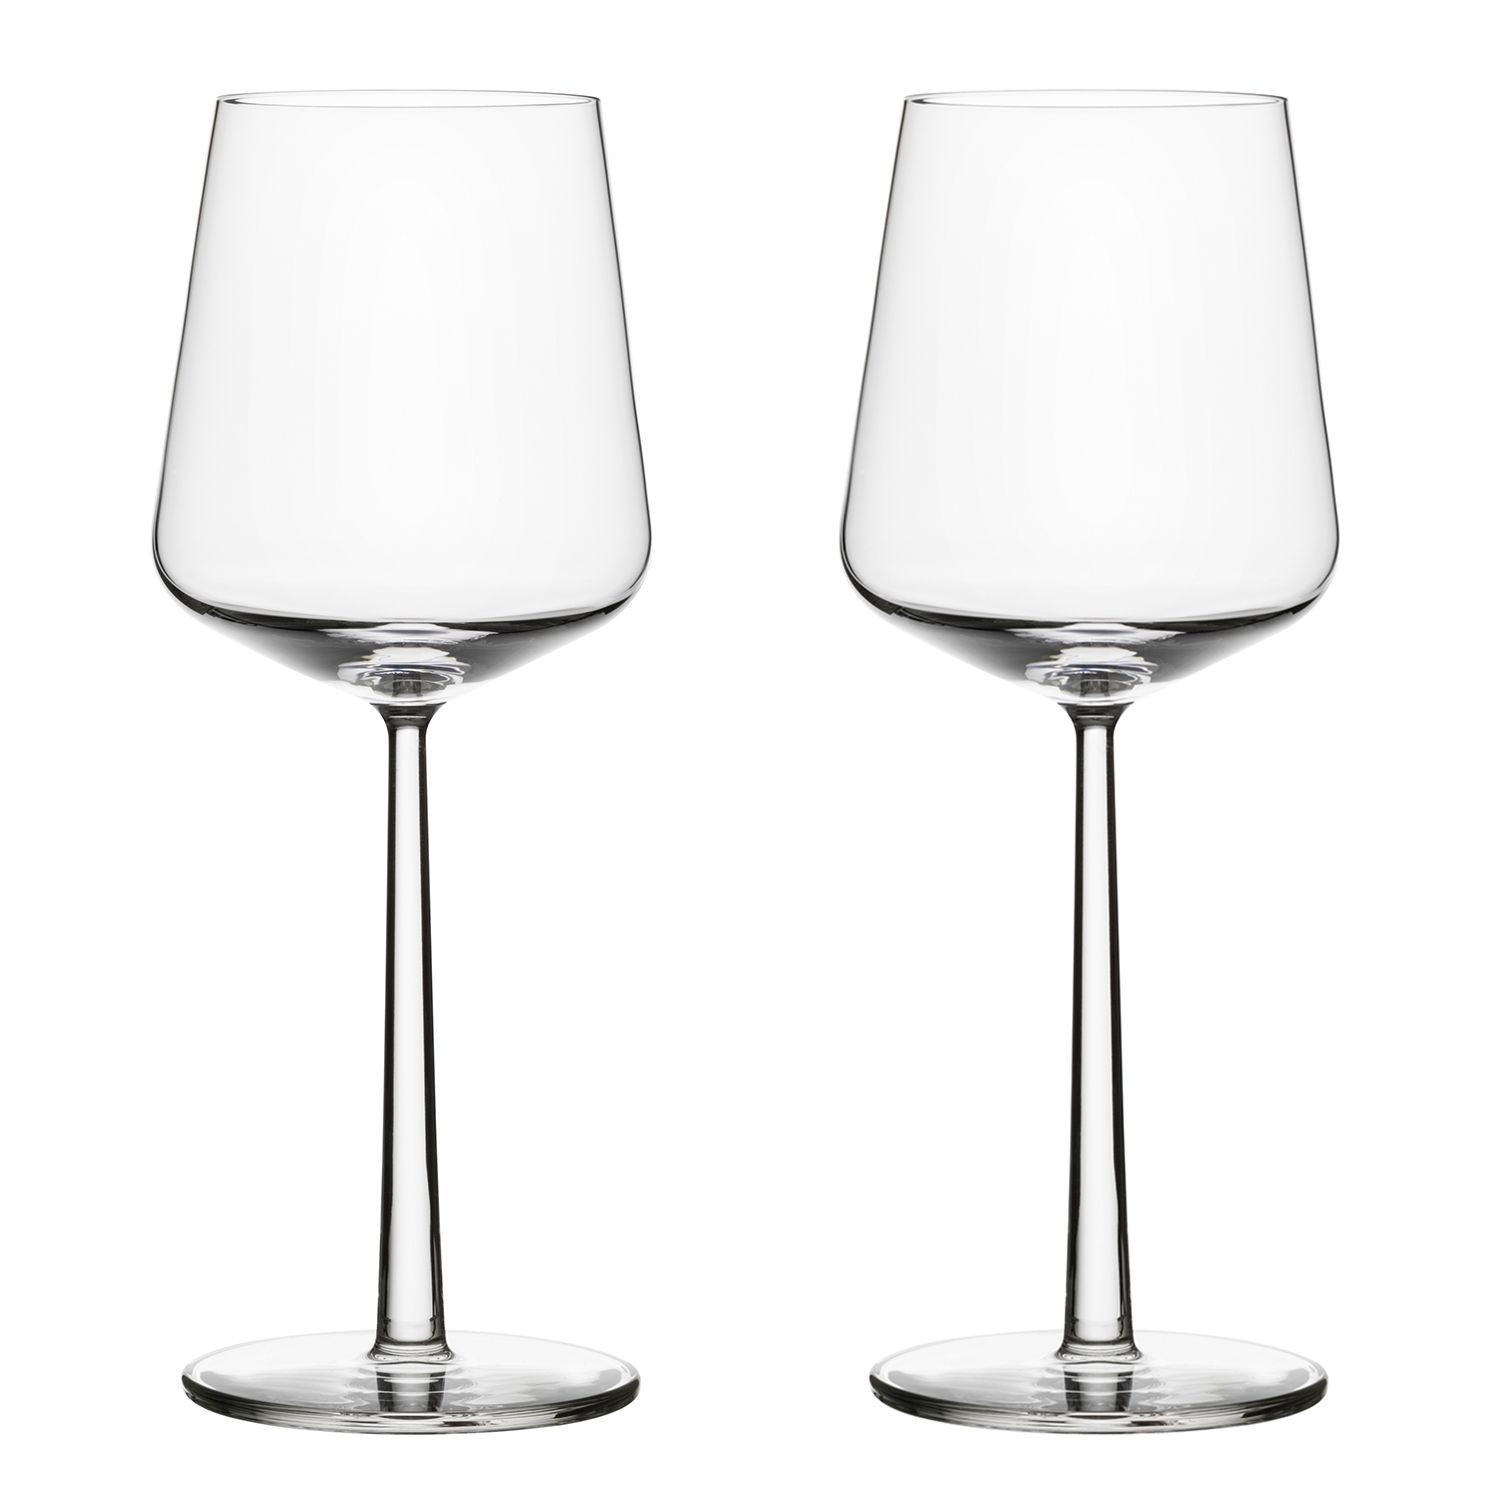 20 Nice Waterford Lismore Diamond Vase 2024 free download waterford lismore diamond vase of 48 nachtmann crystal vase the weekly world intended for essence red wine glass set of 4 alfredo hac2a4berli iittala